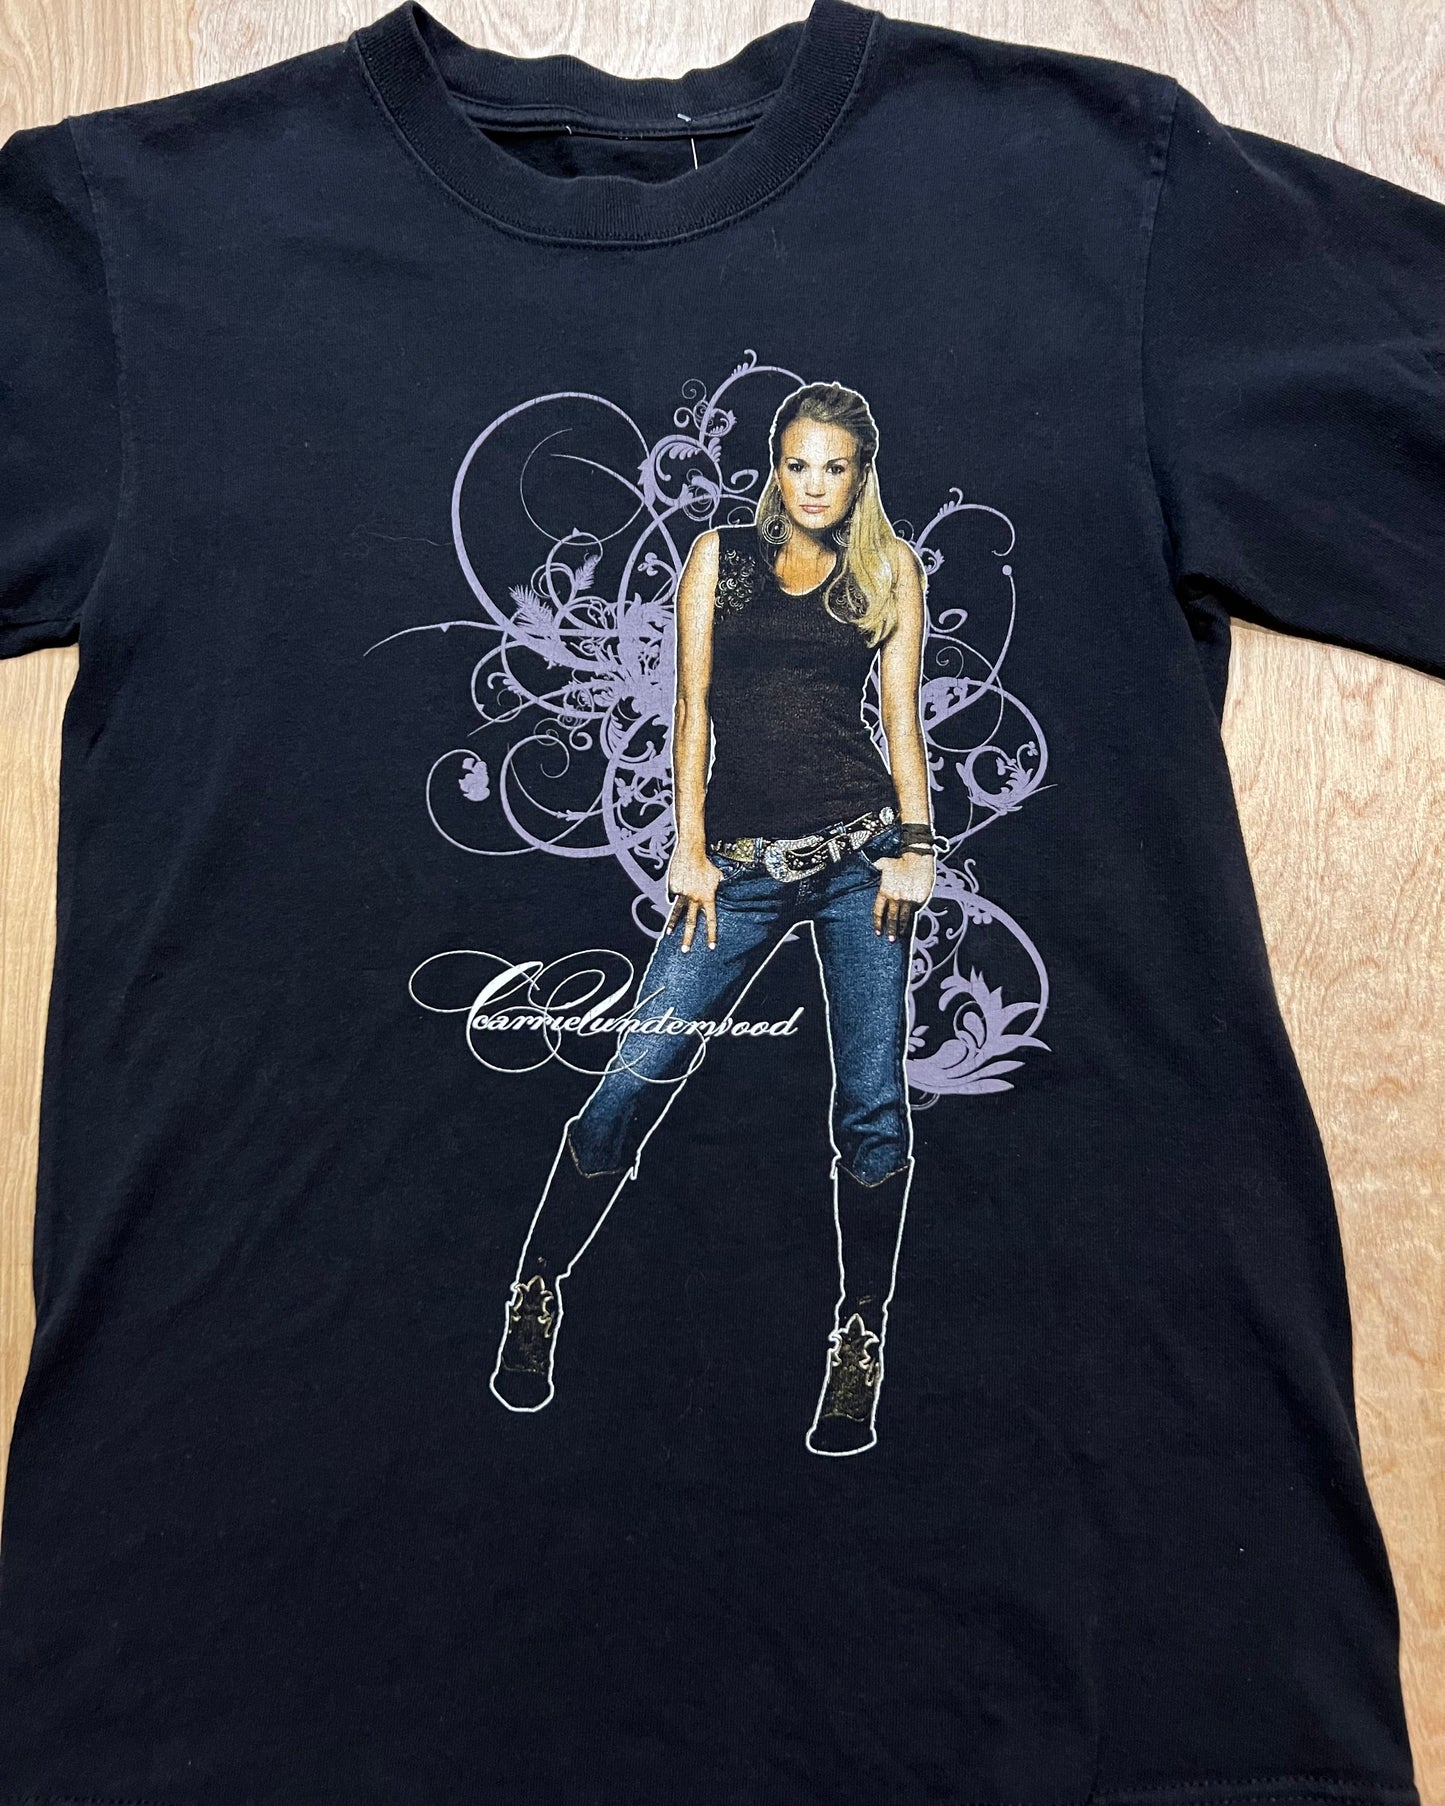 2008 Carrie Underwood Carnival Ride Tour T-Shirt